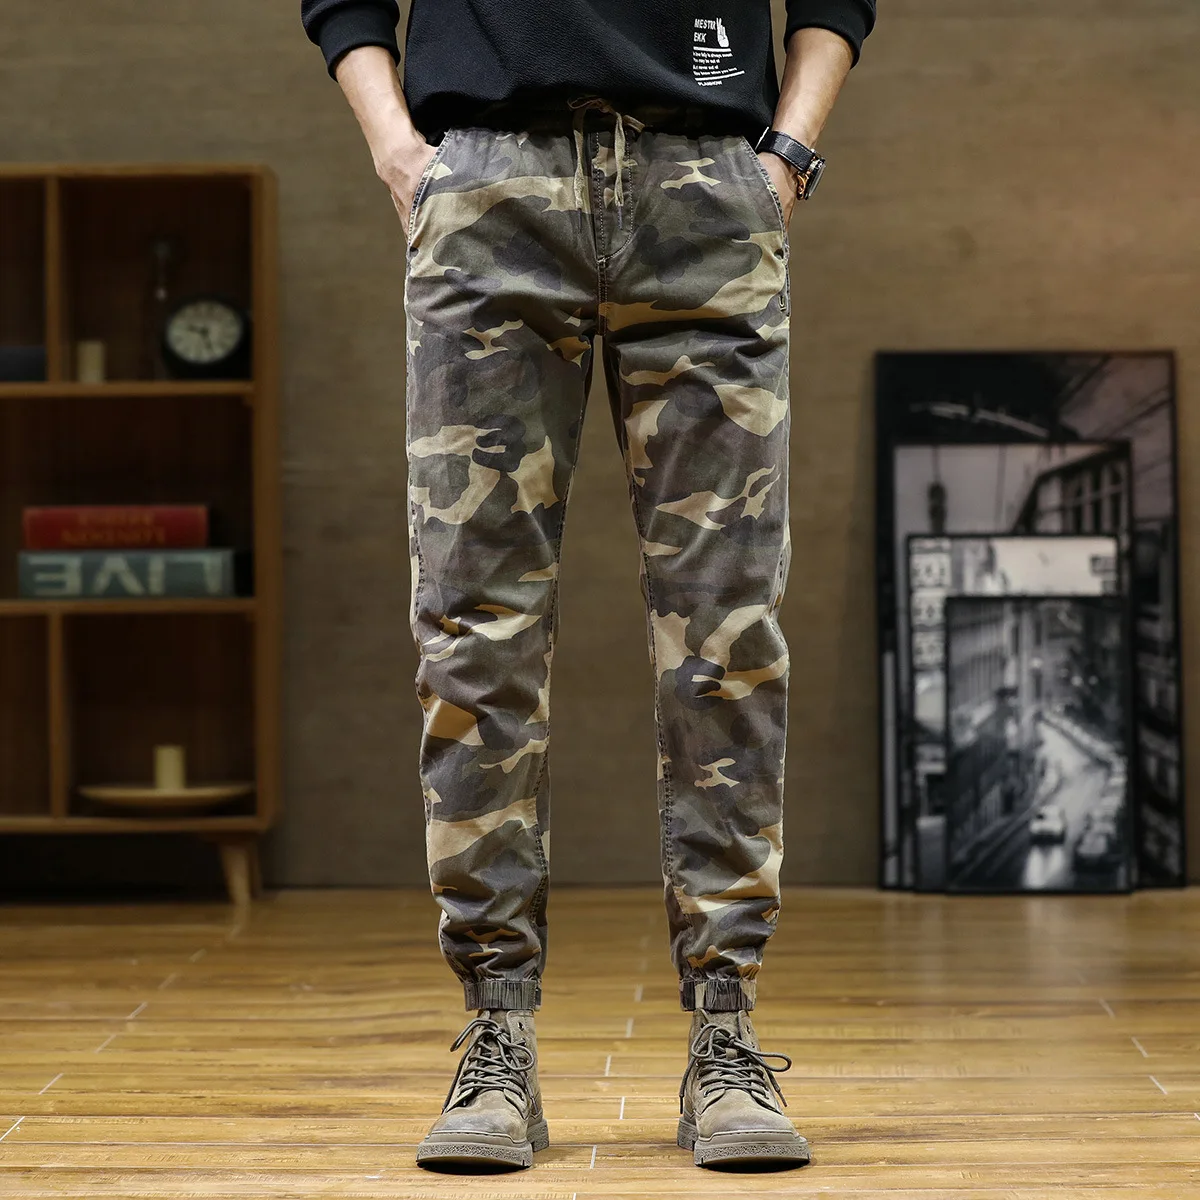 Elmsk Men's Spring/Summer Thin Workwear Pants Youth Fashion Camo Pants Large Loose Comfortable Drawstring High Waist Pants elmsk men s large pocket workwear shorts summer thin stretch comfortable capris personalized loose large fashion tight pants